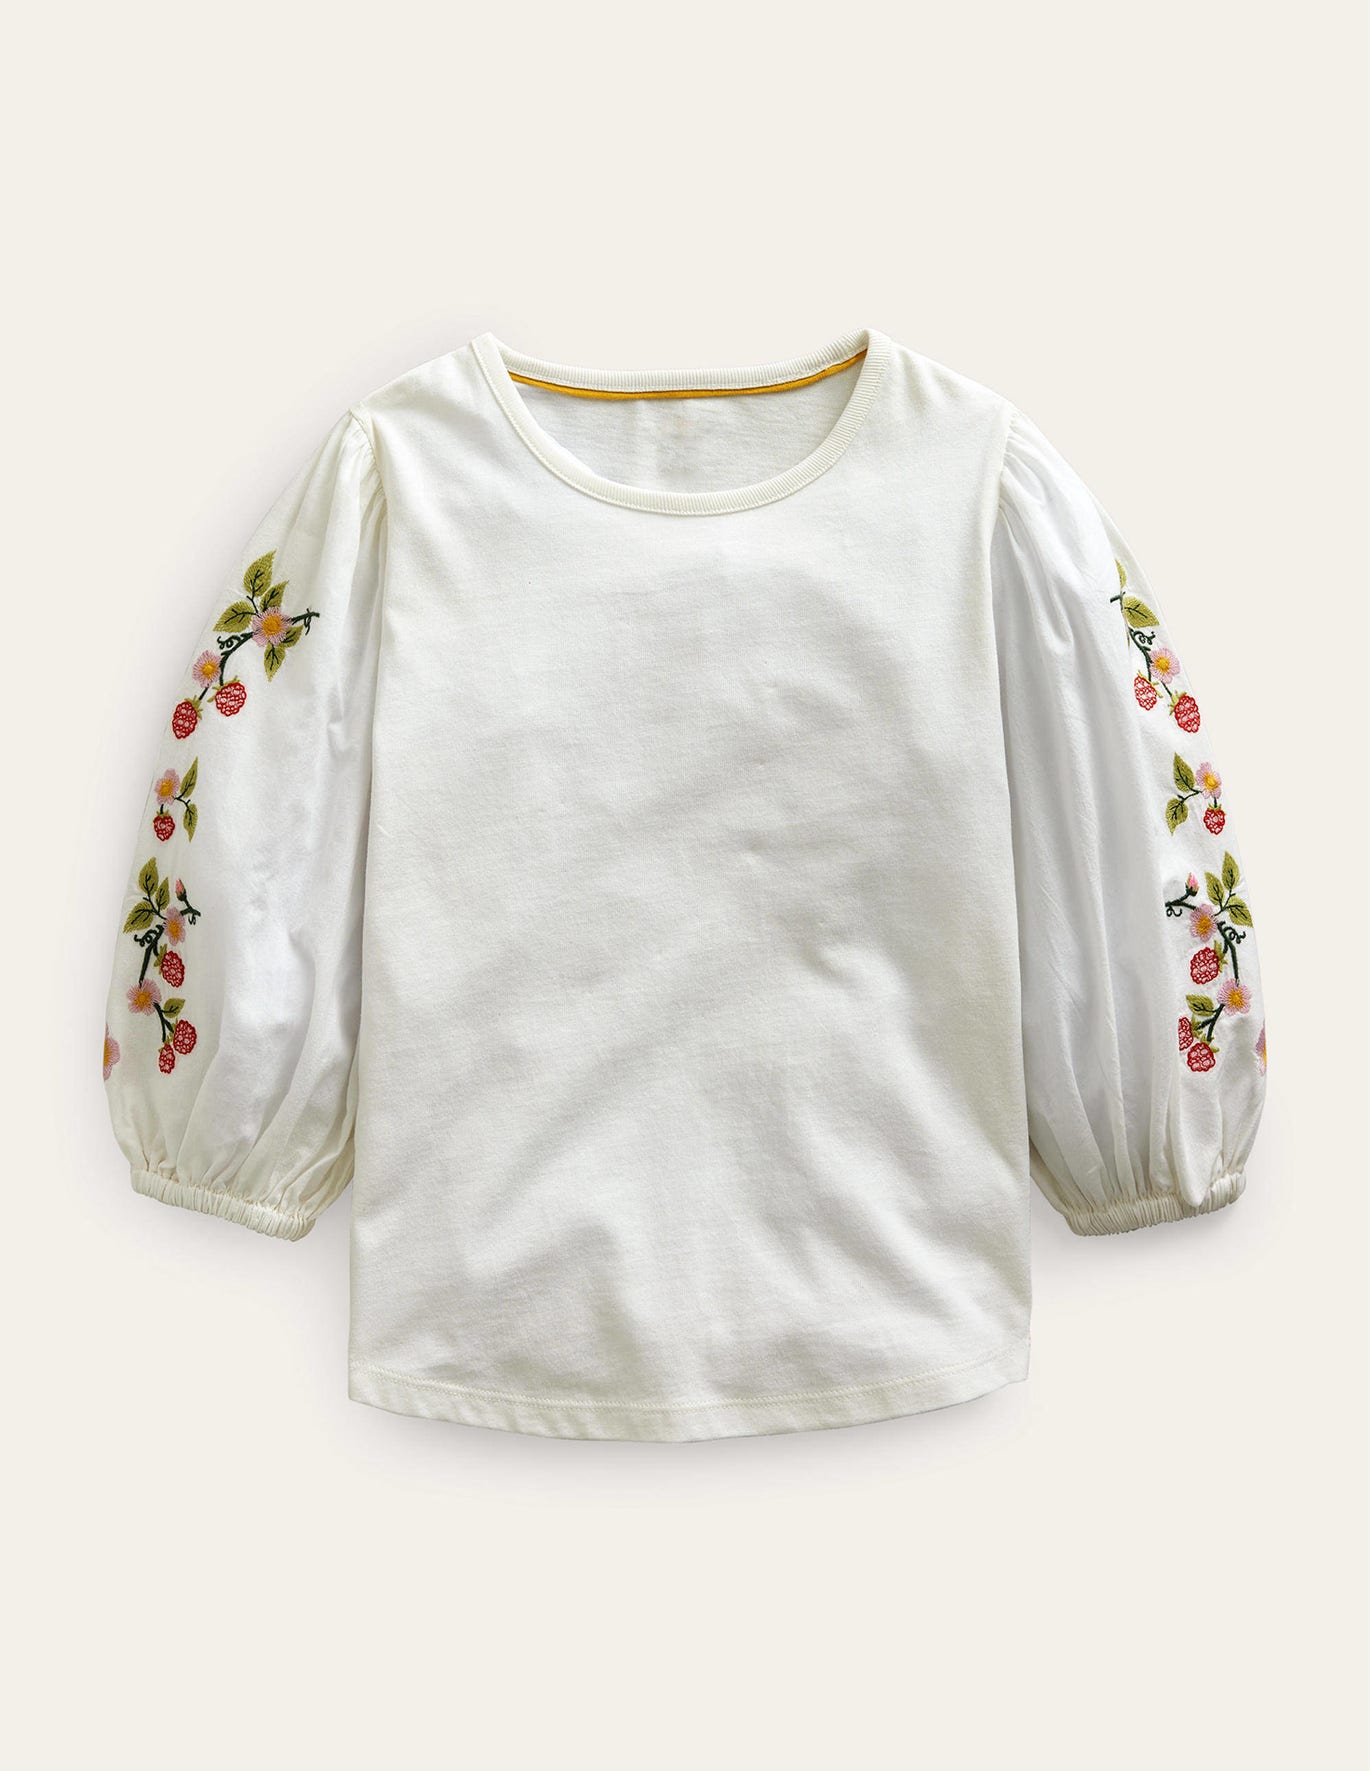 Boden Embroidered Puff Sleeve Top - Ivory